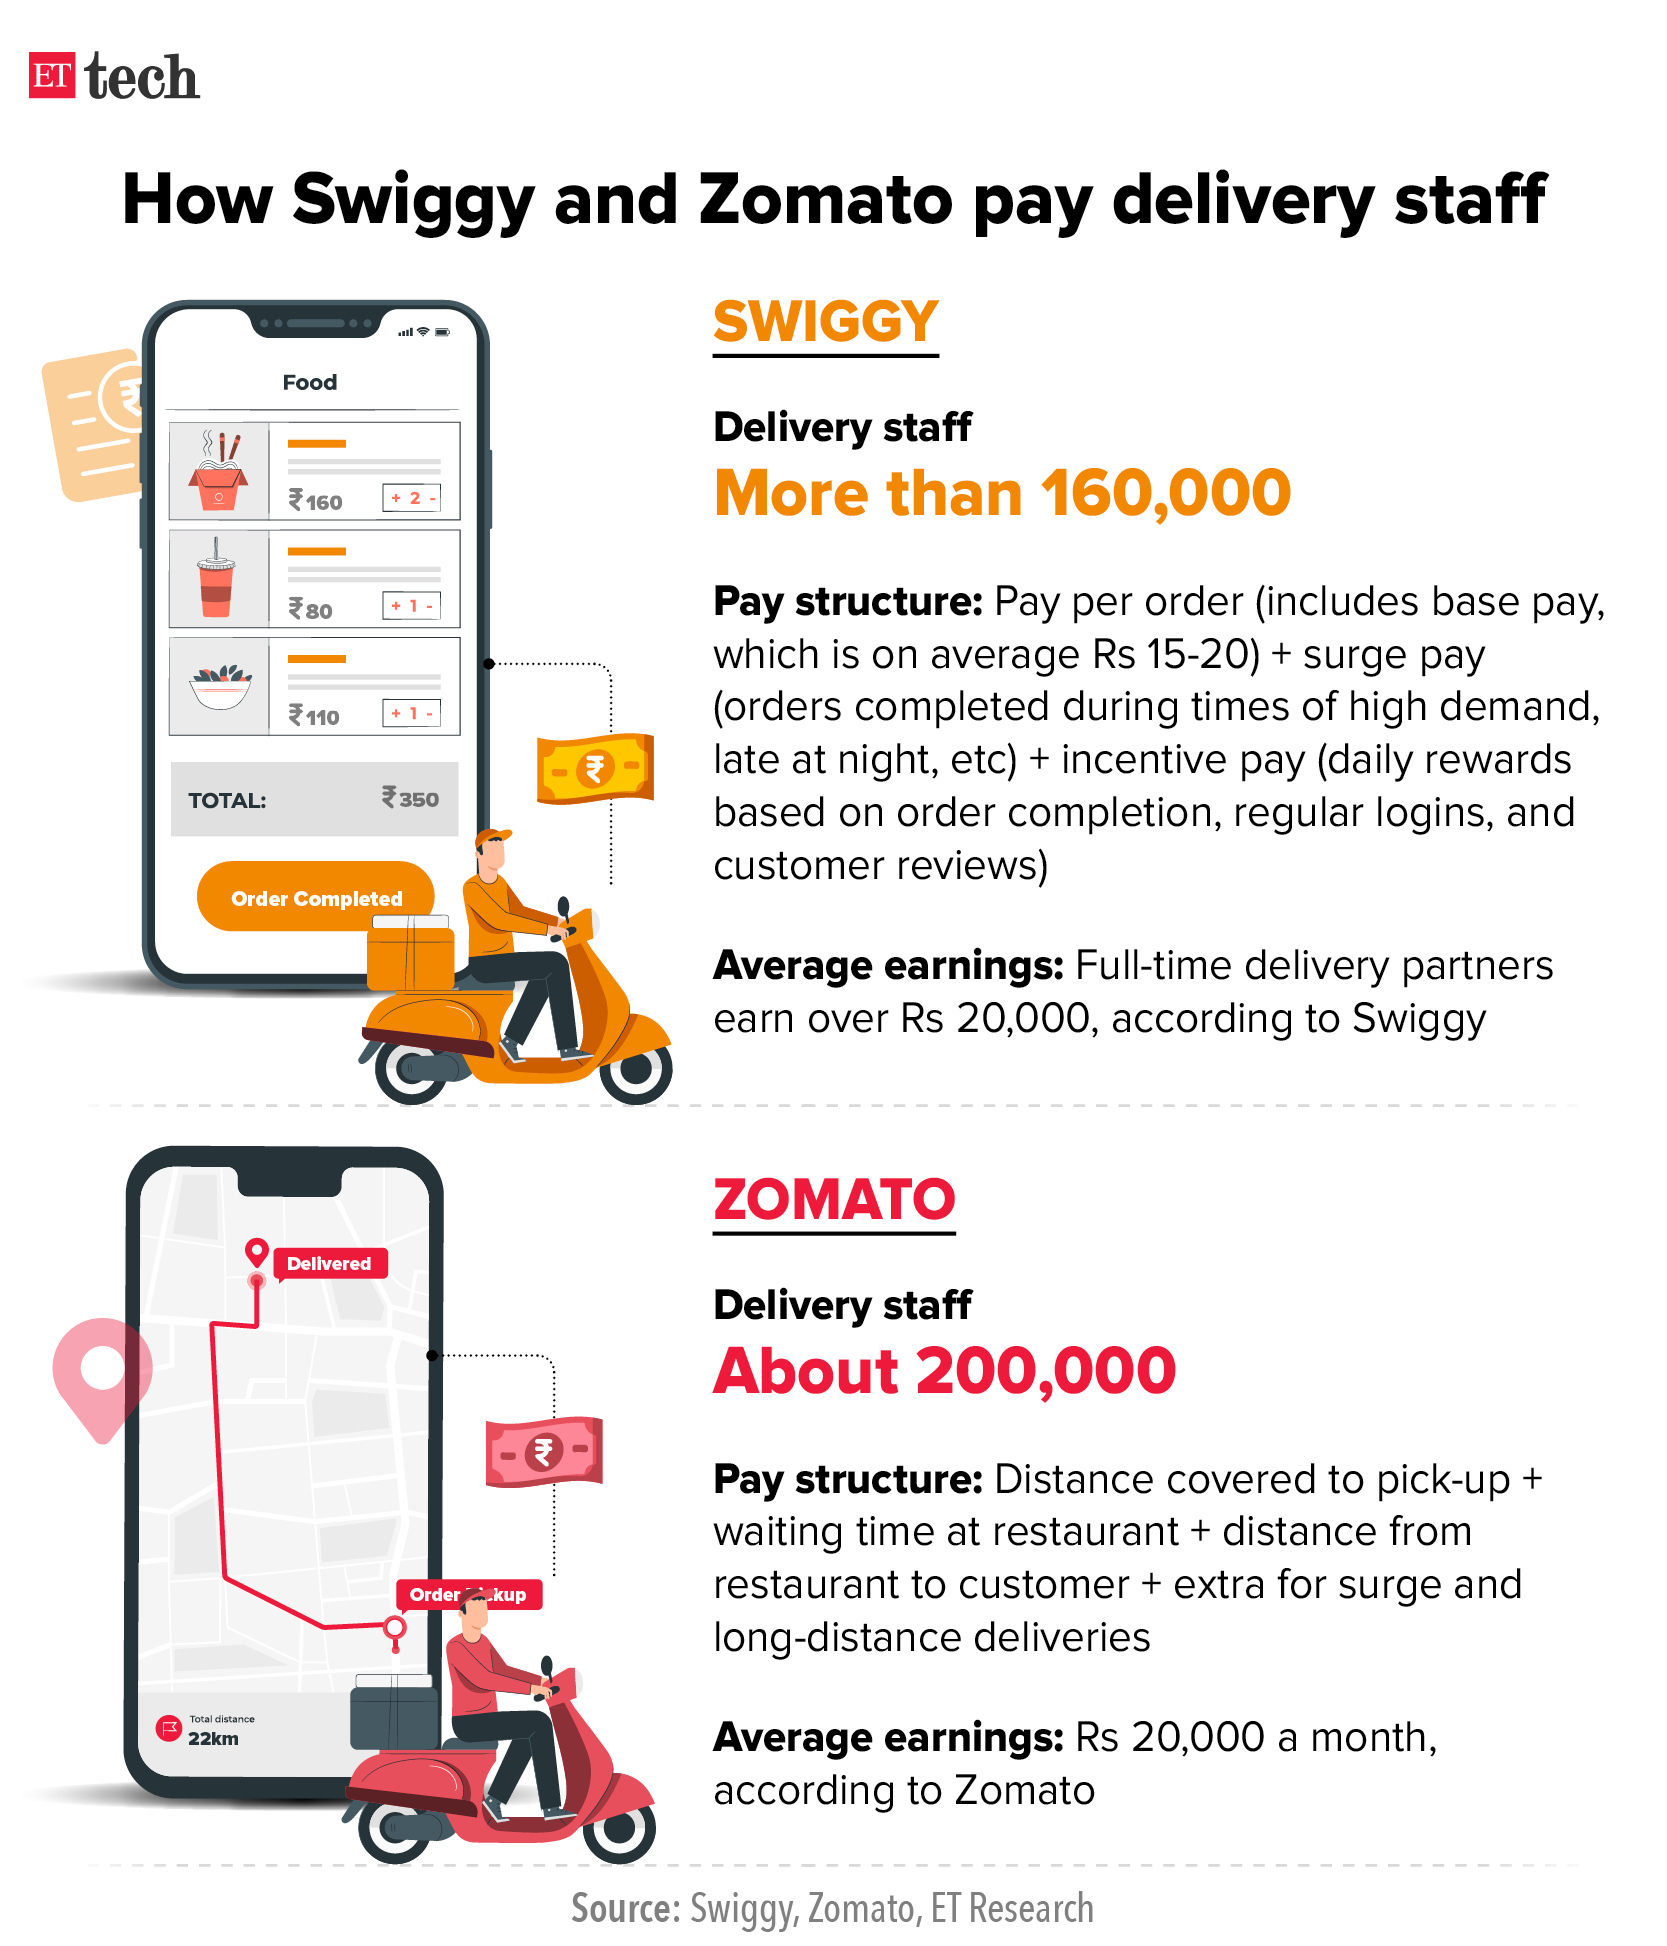 How Swiggy and Zomato pay